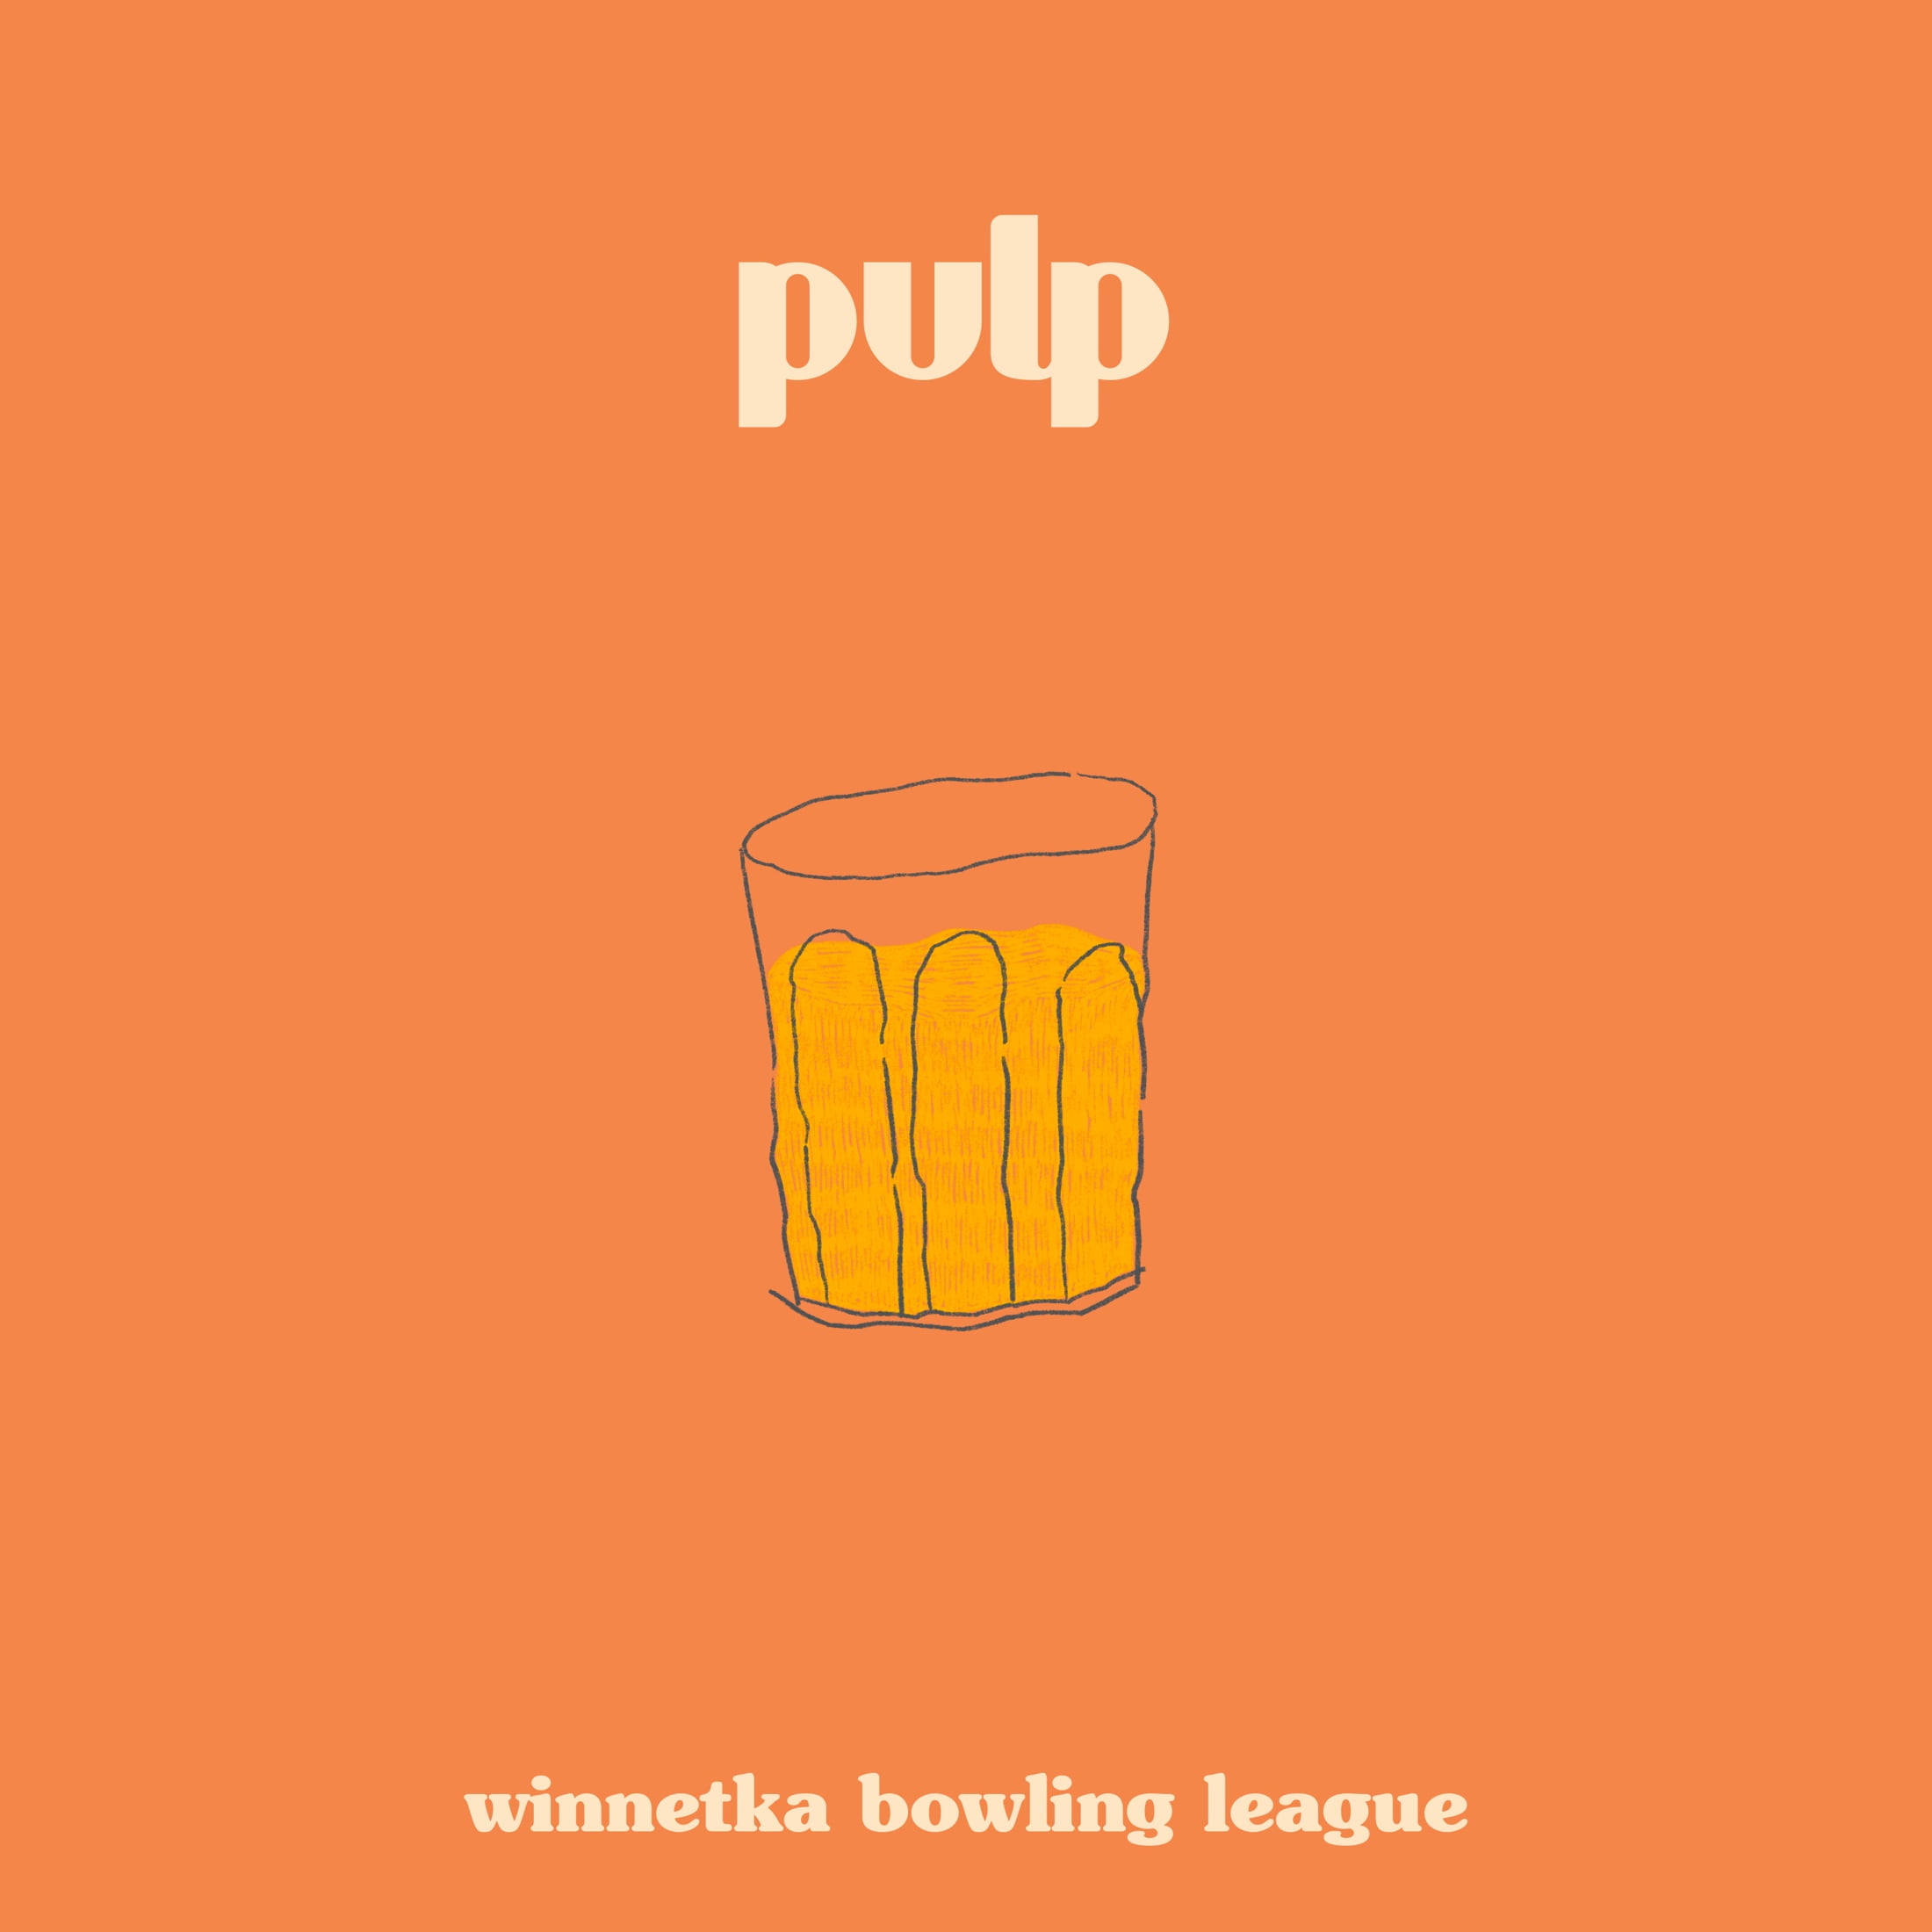 pulp EP cover artwork via Kirsten Mikkelson for use by 360 MAGAZINE